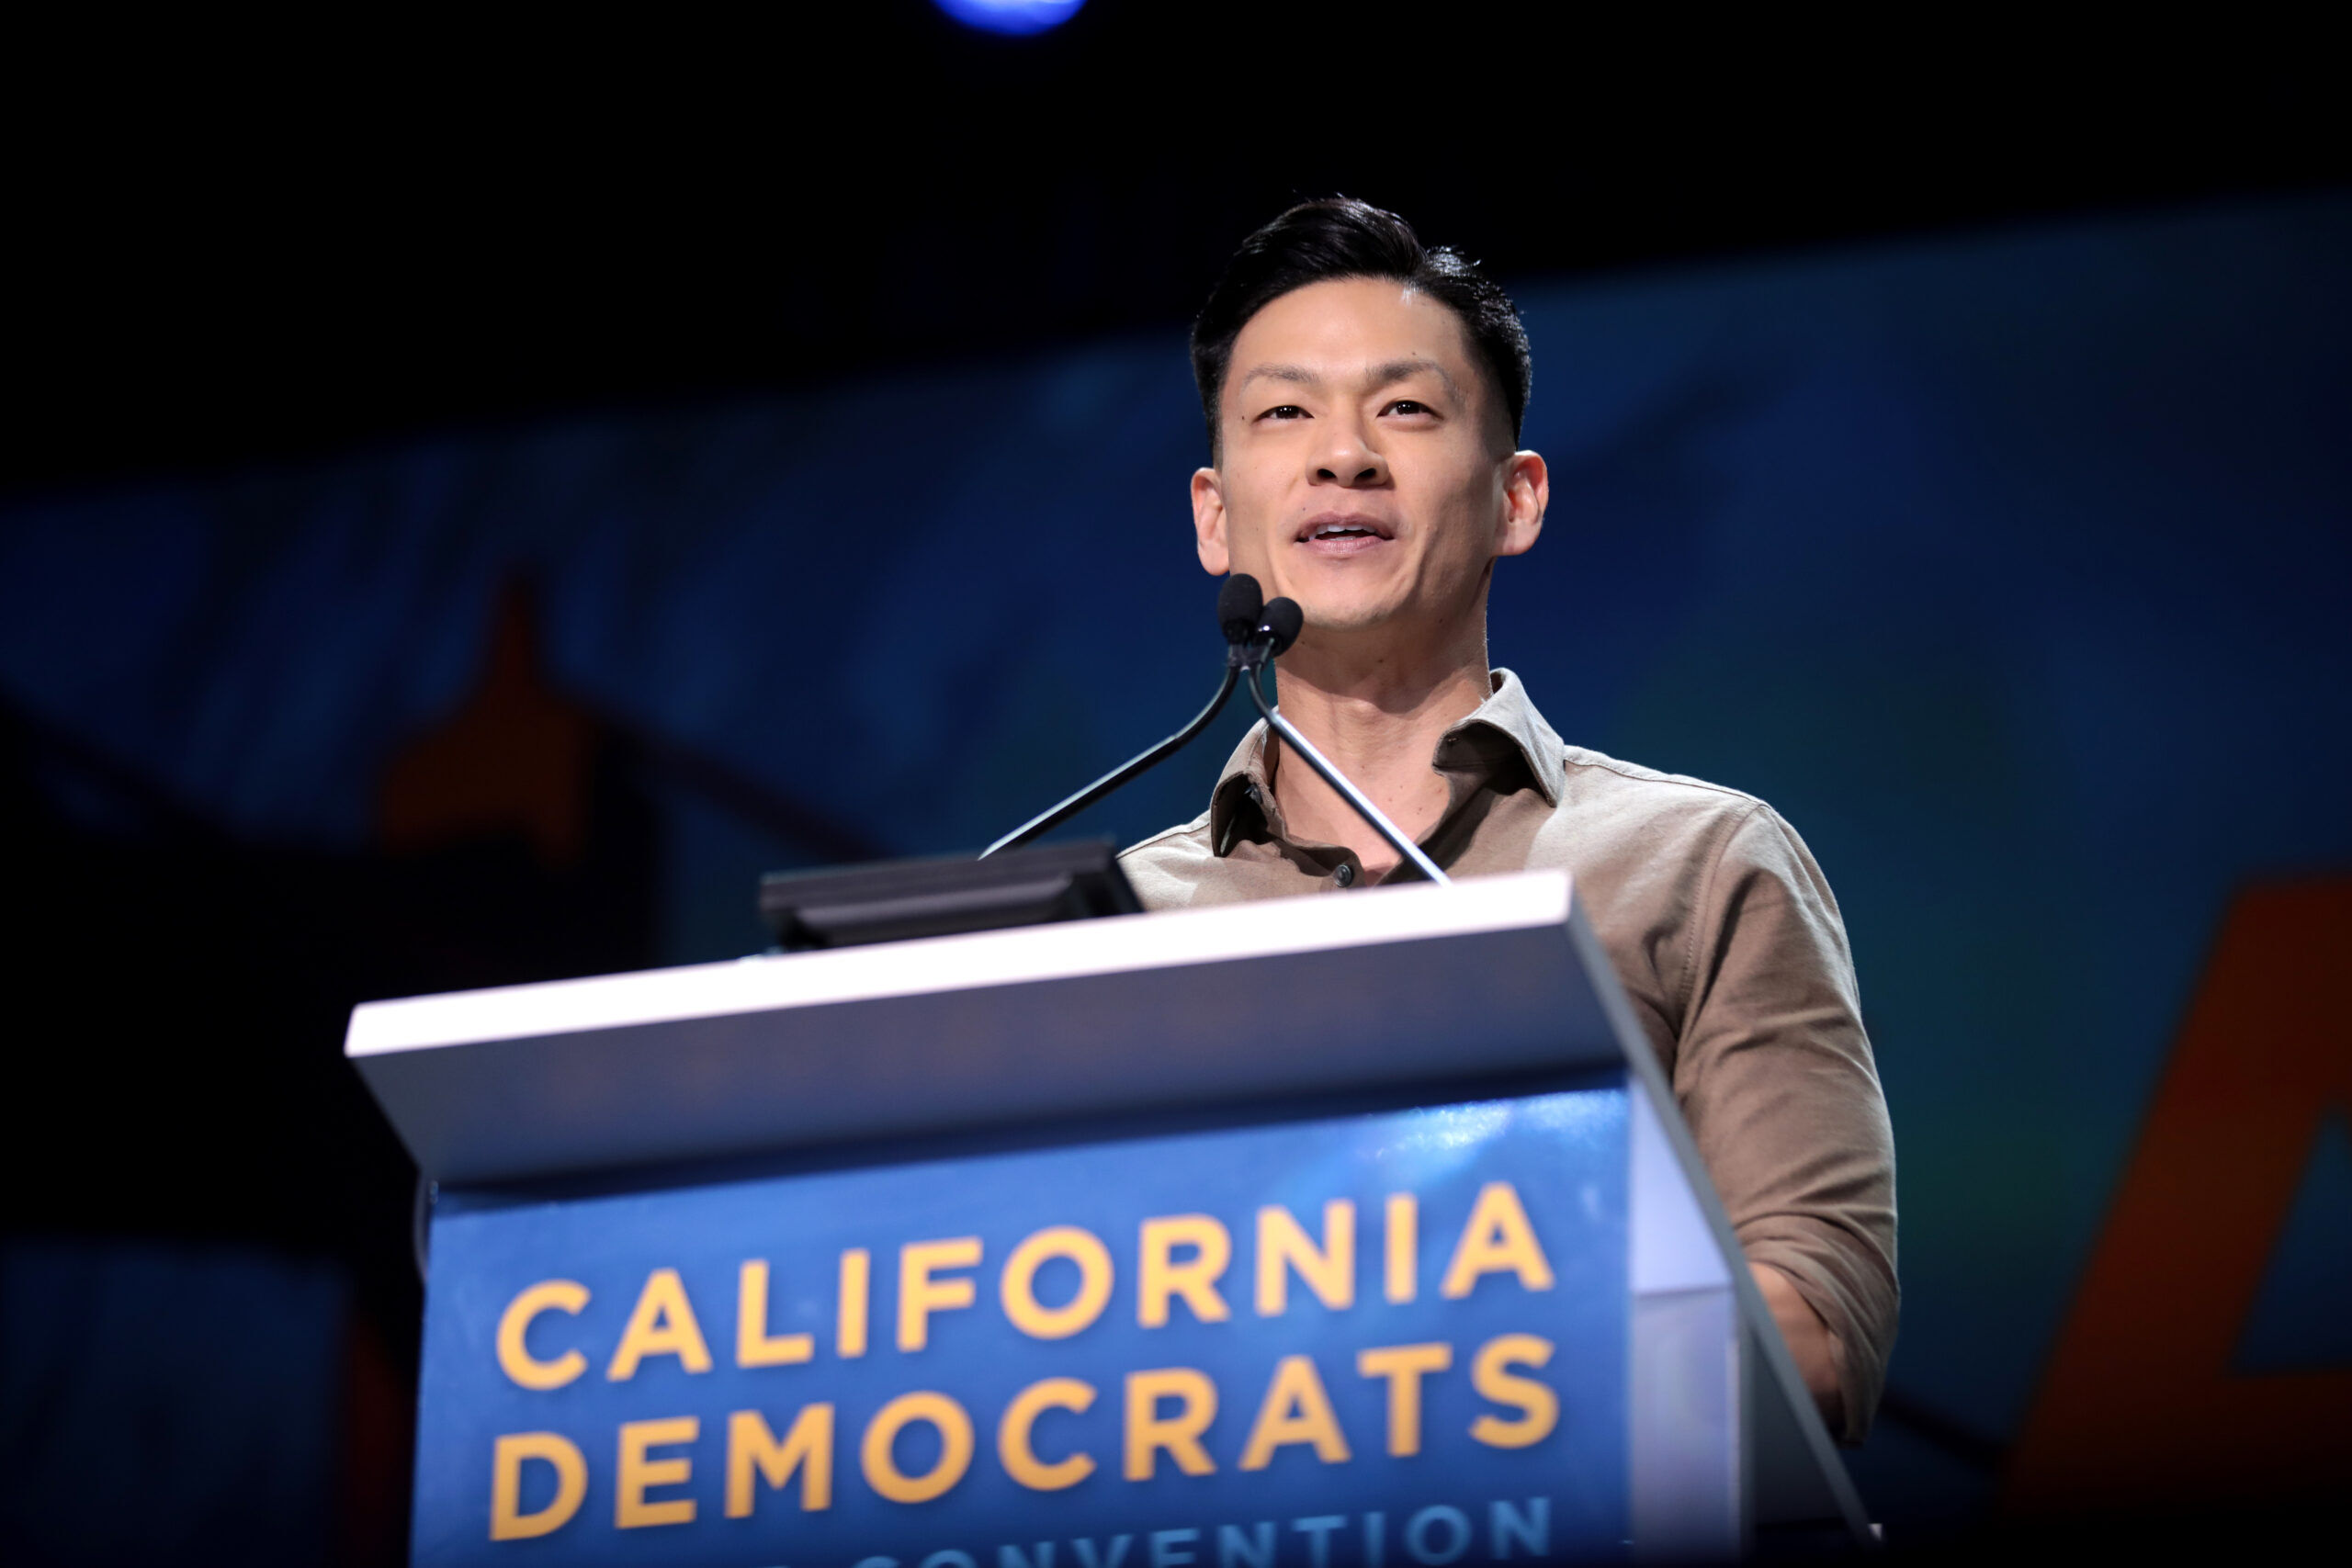 Assembly Member Evan Low speaking with attendees at the 2019 California Democratic Party State Convention at the George R. Moscone Convention Center in San Francisco, California.